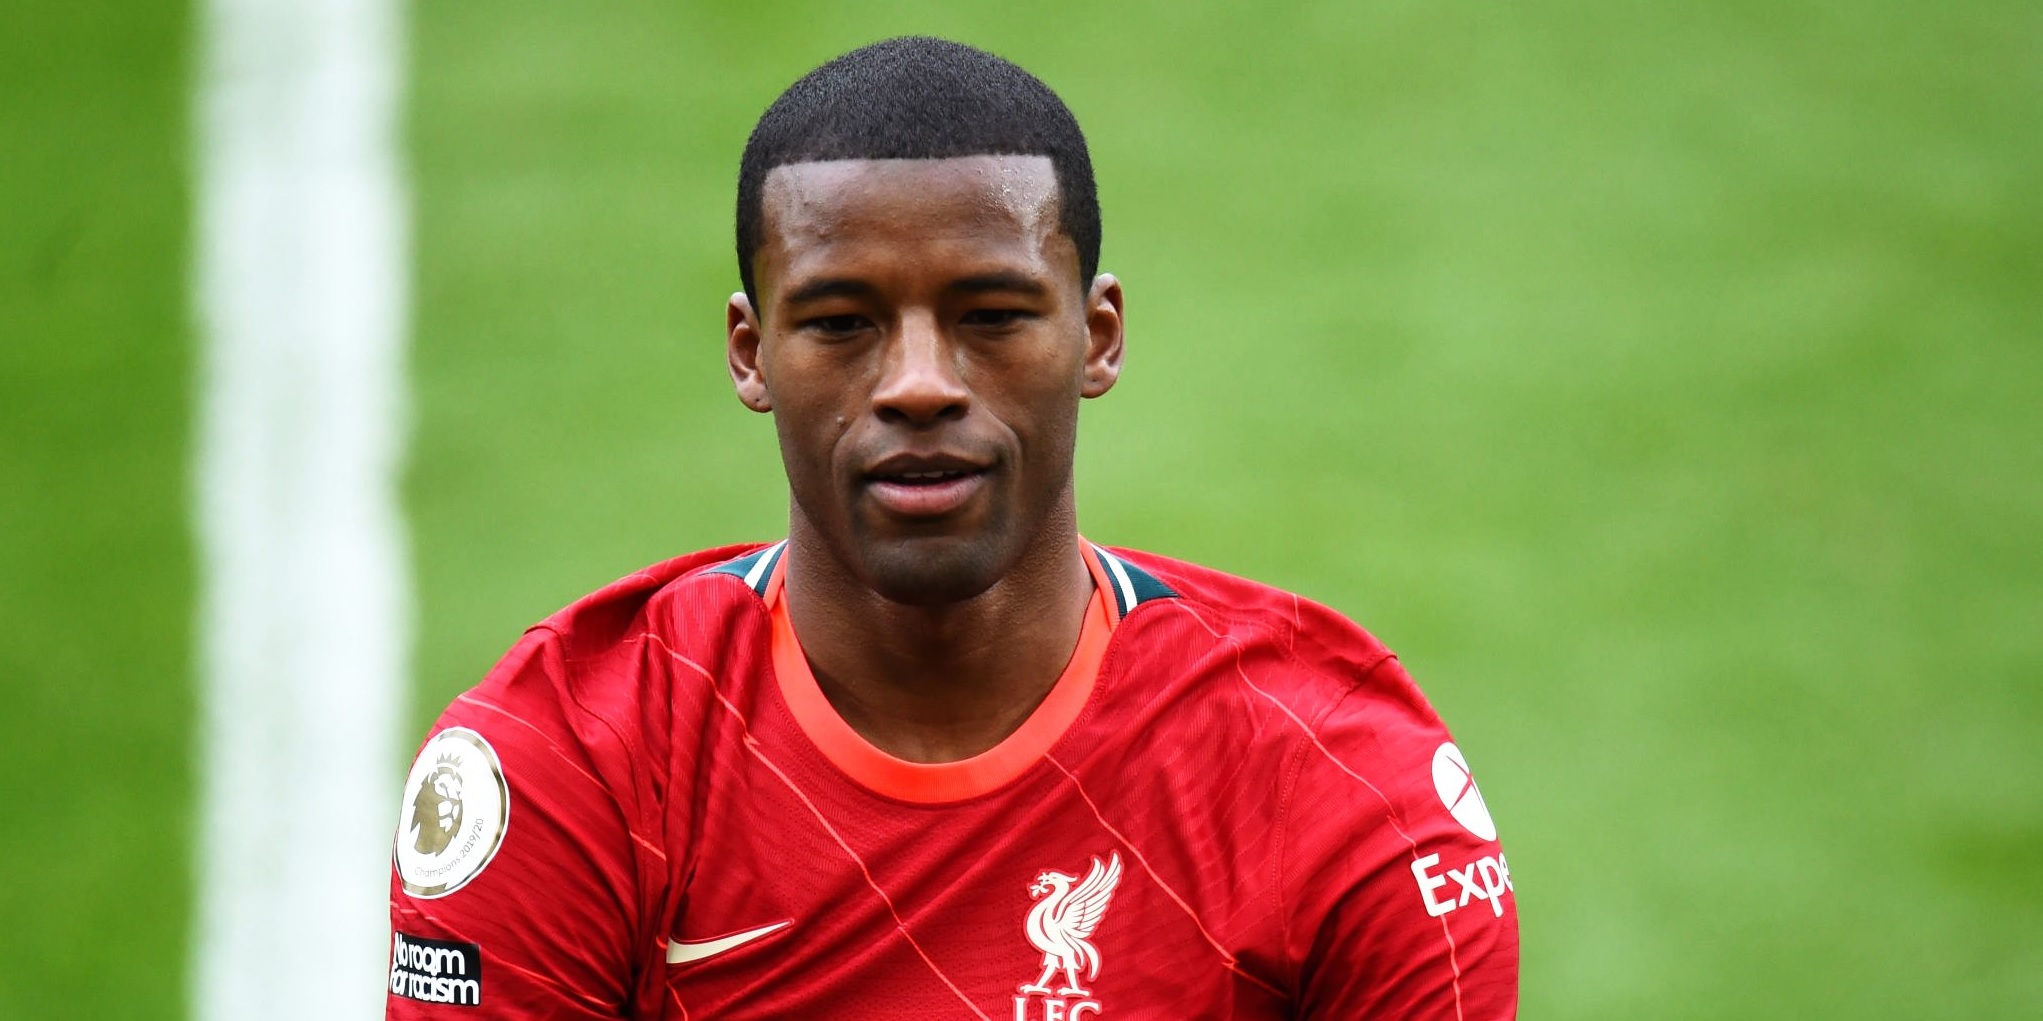 Ligue 1 giants enter the fray as Liverpool midfielder’s future is now uncertain – report